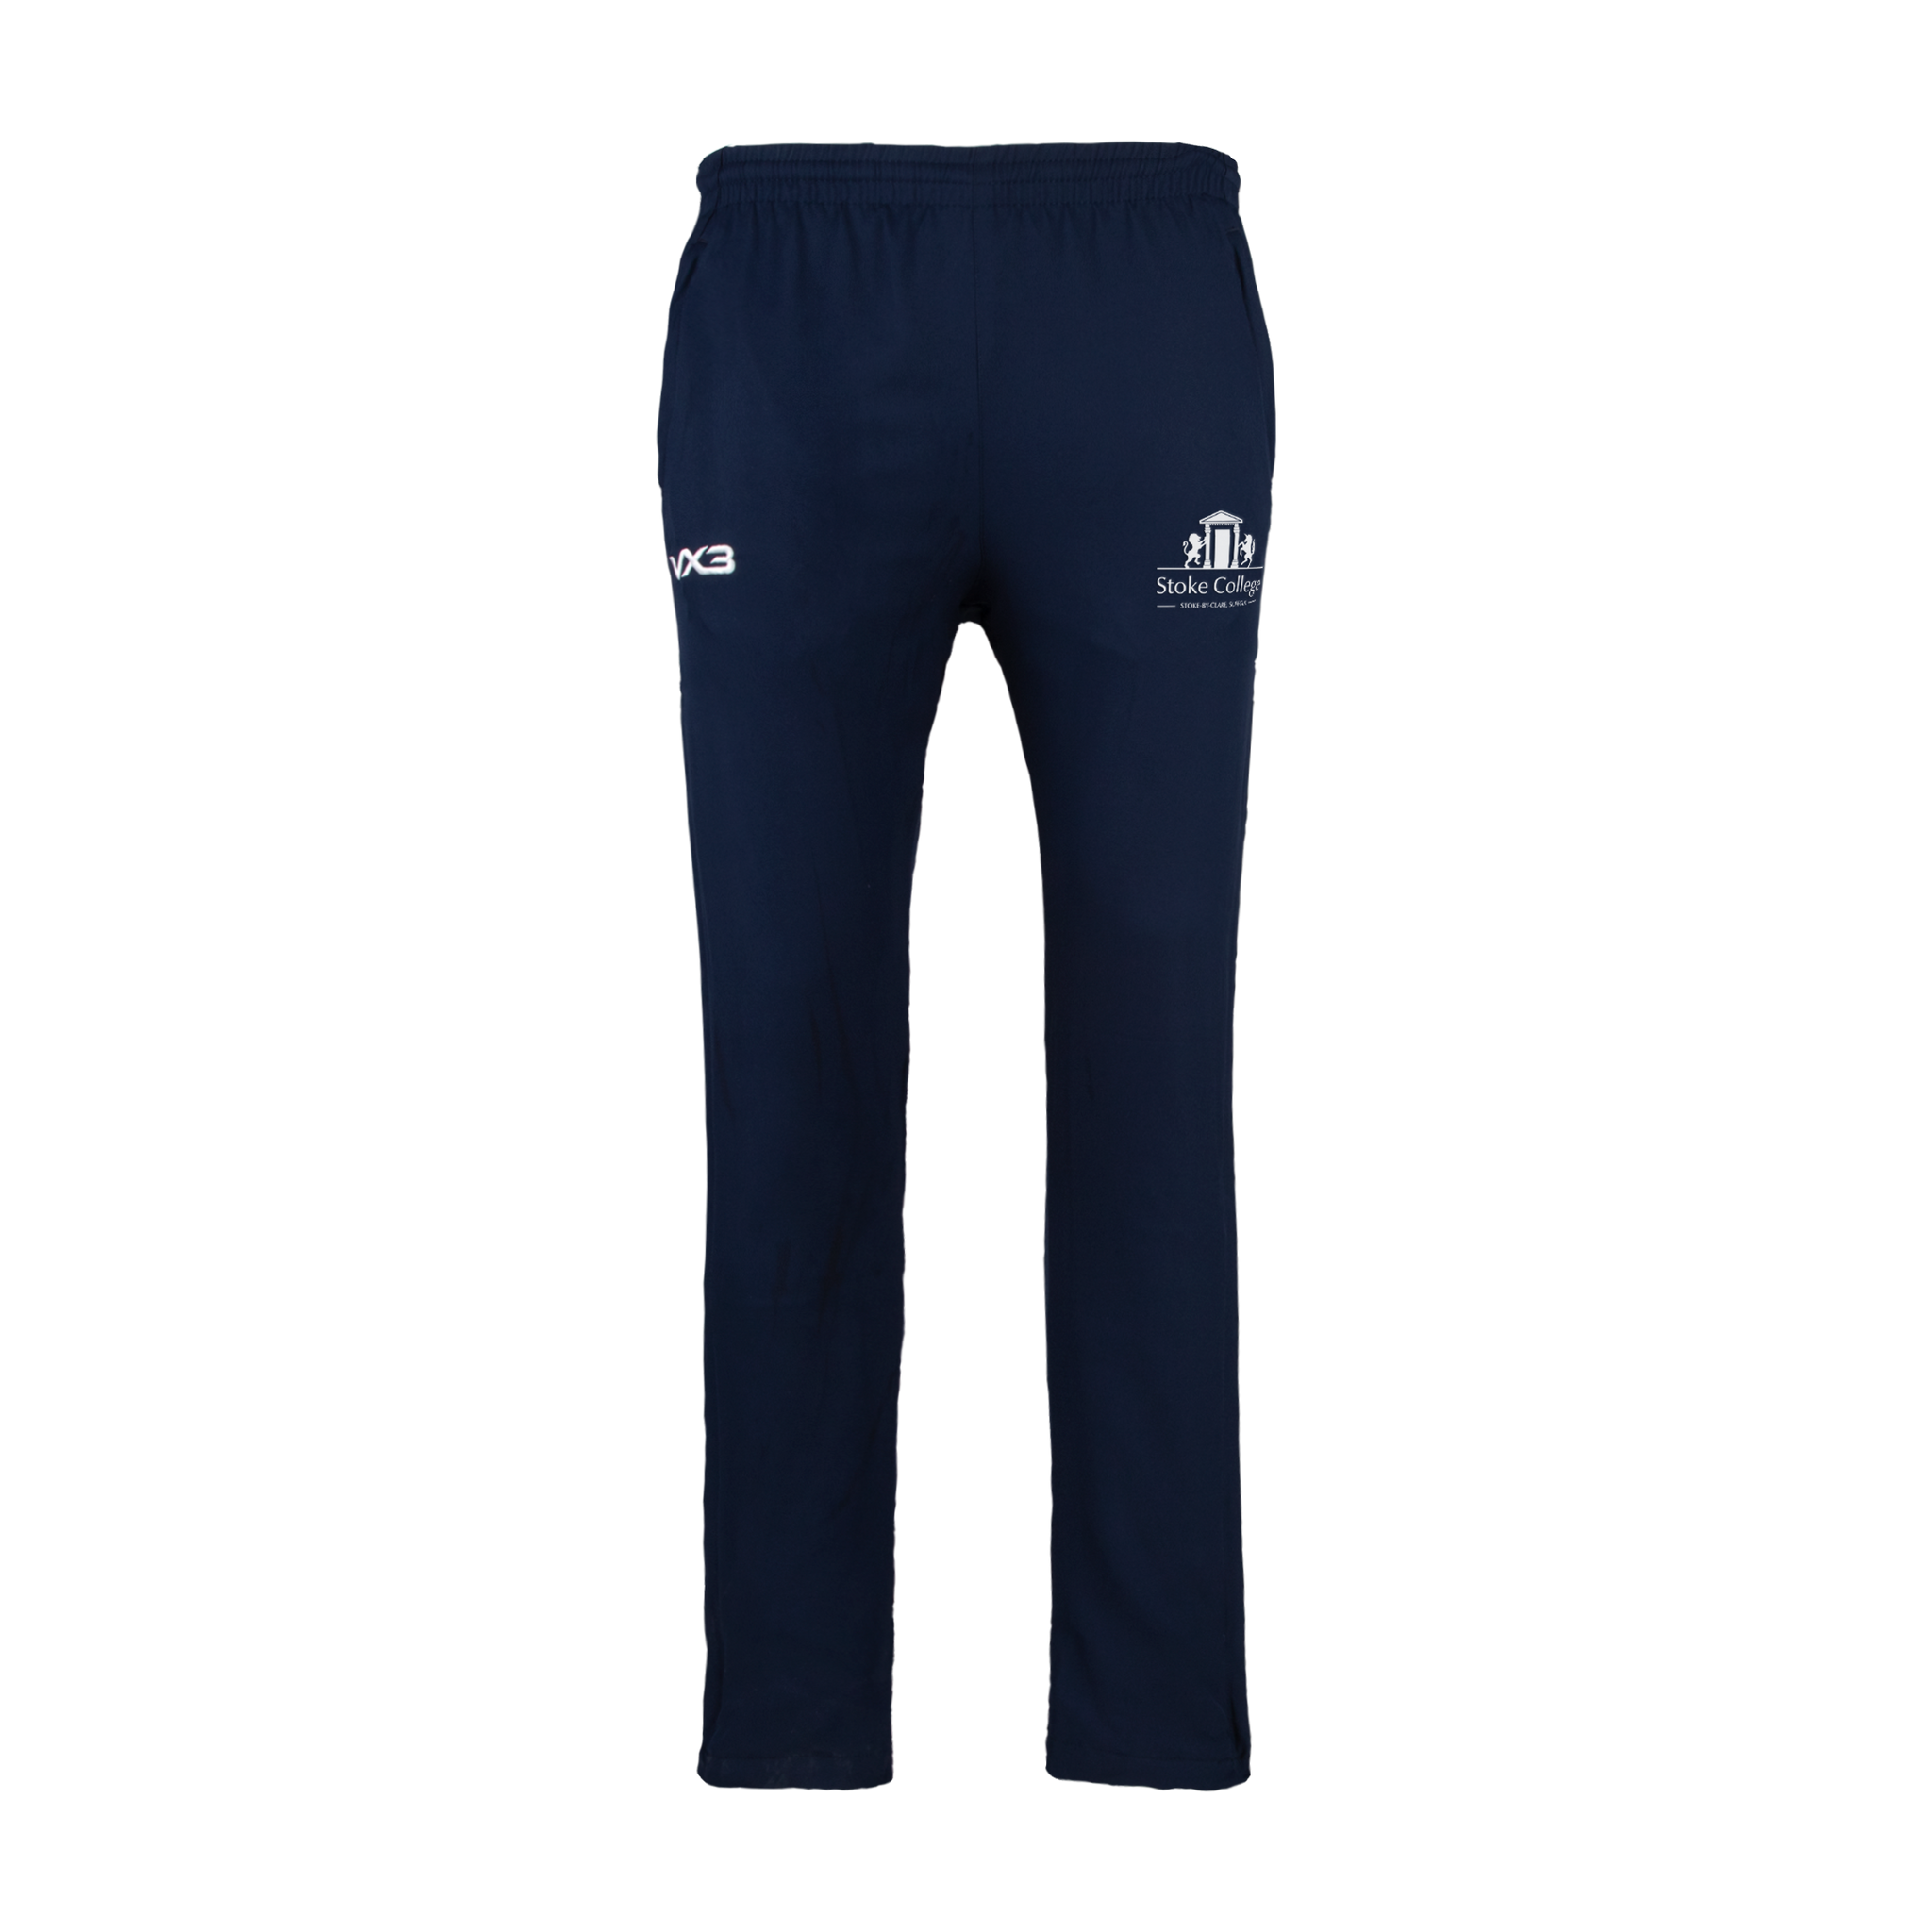 Clare College Womens Cool Athletic Pants